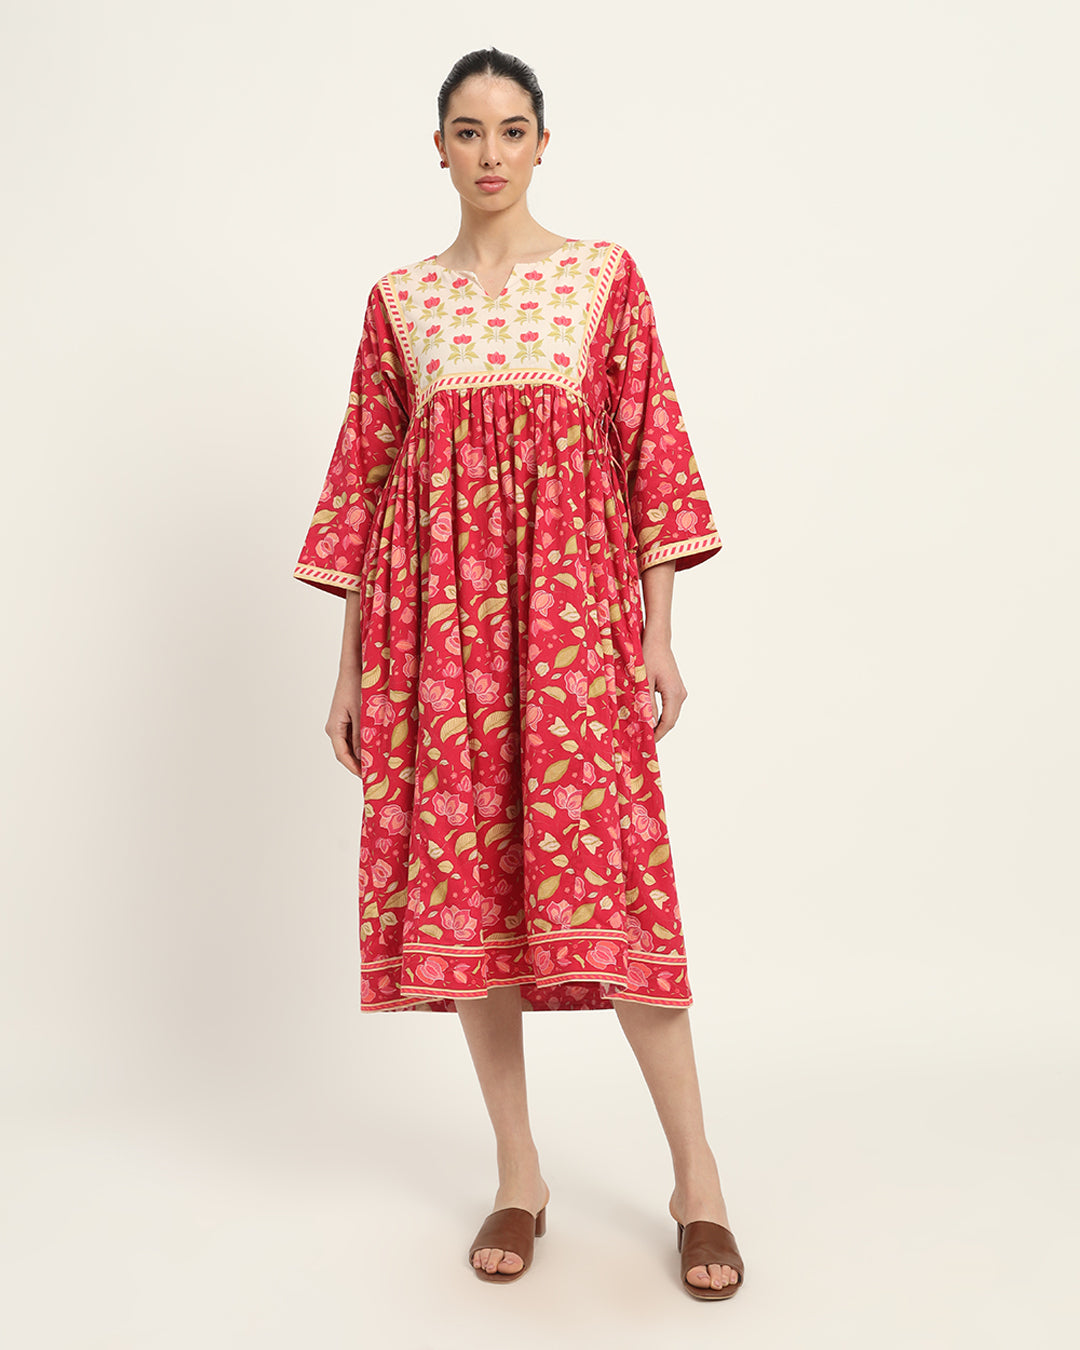 Whimsical Wild Blooms Notch Neck Dress